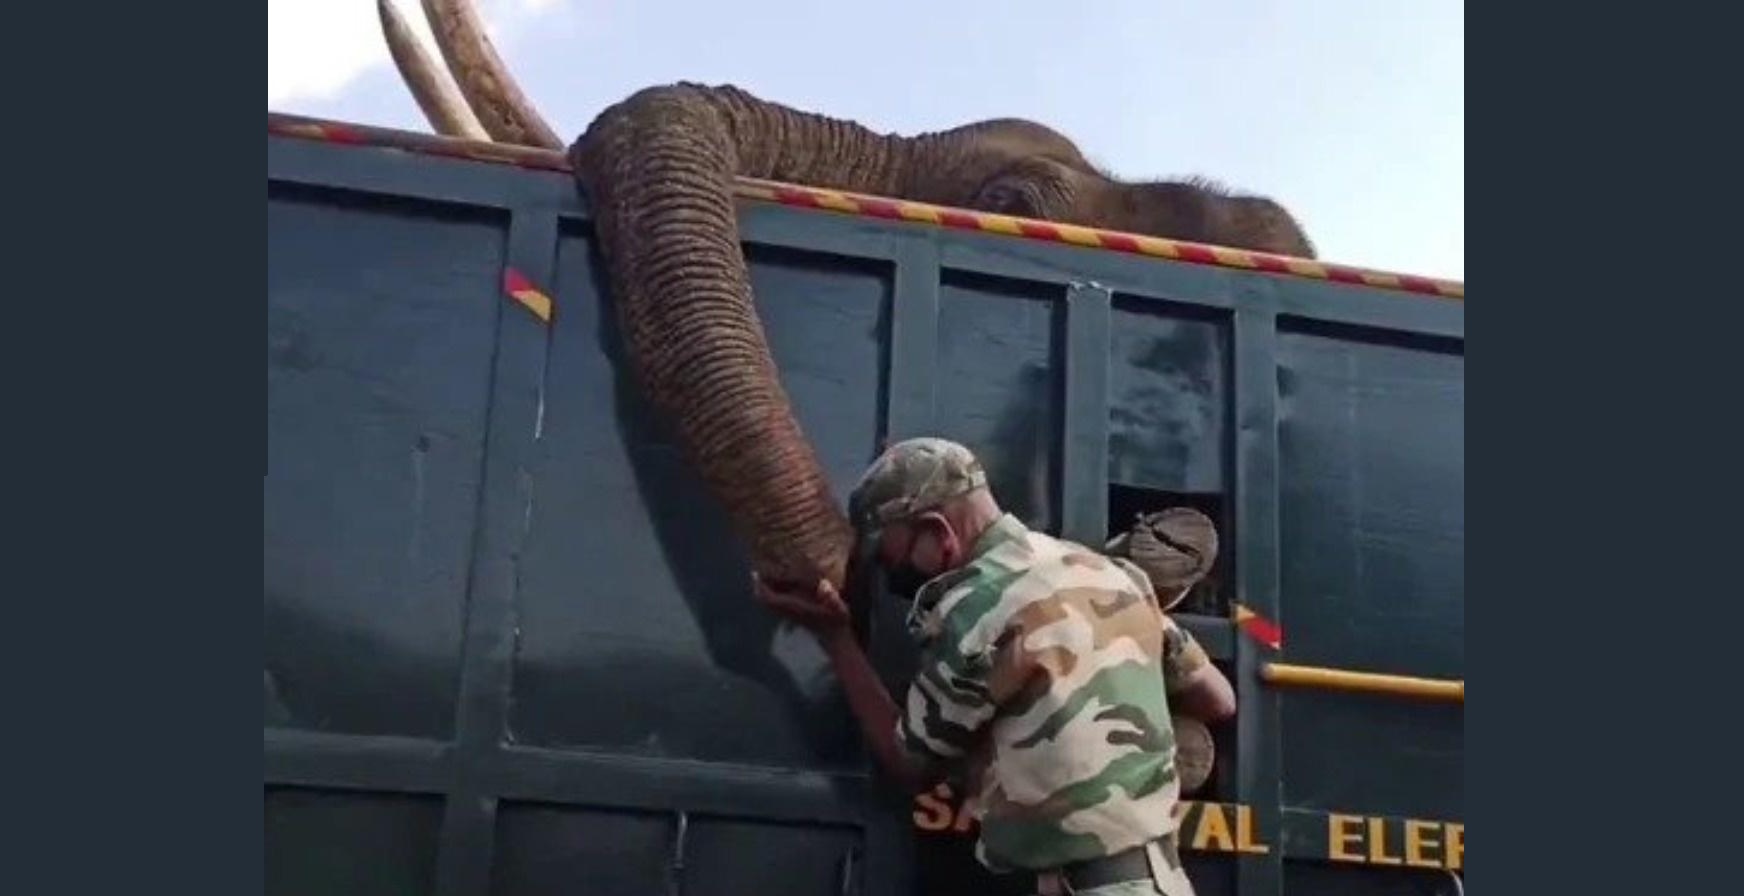 Tamil Nadu Ranger Cries Inconsolably While Bidding Goodbye to Elephant Who Died Of His Injuries